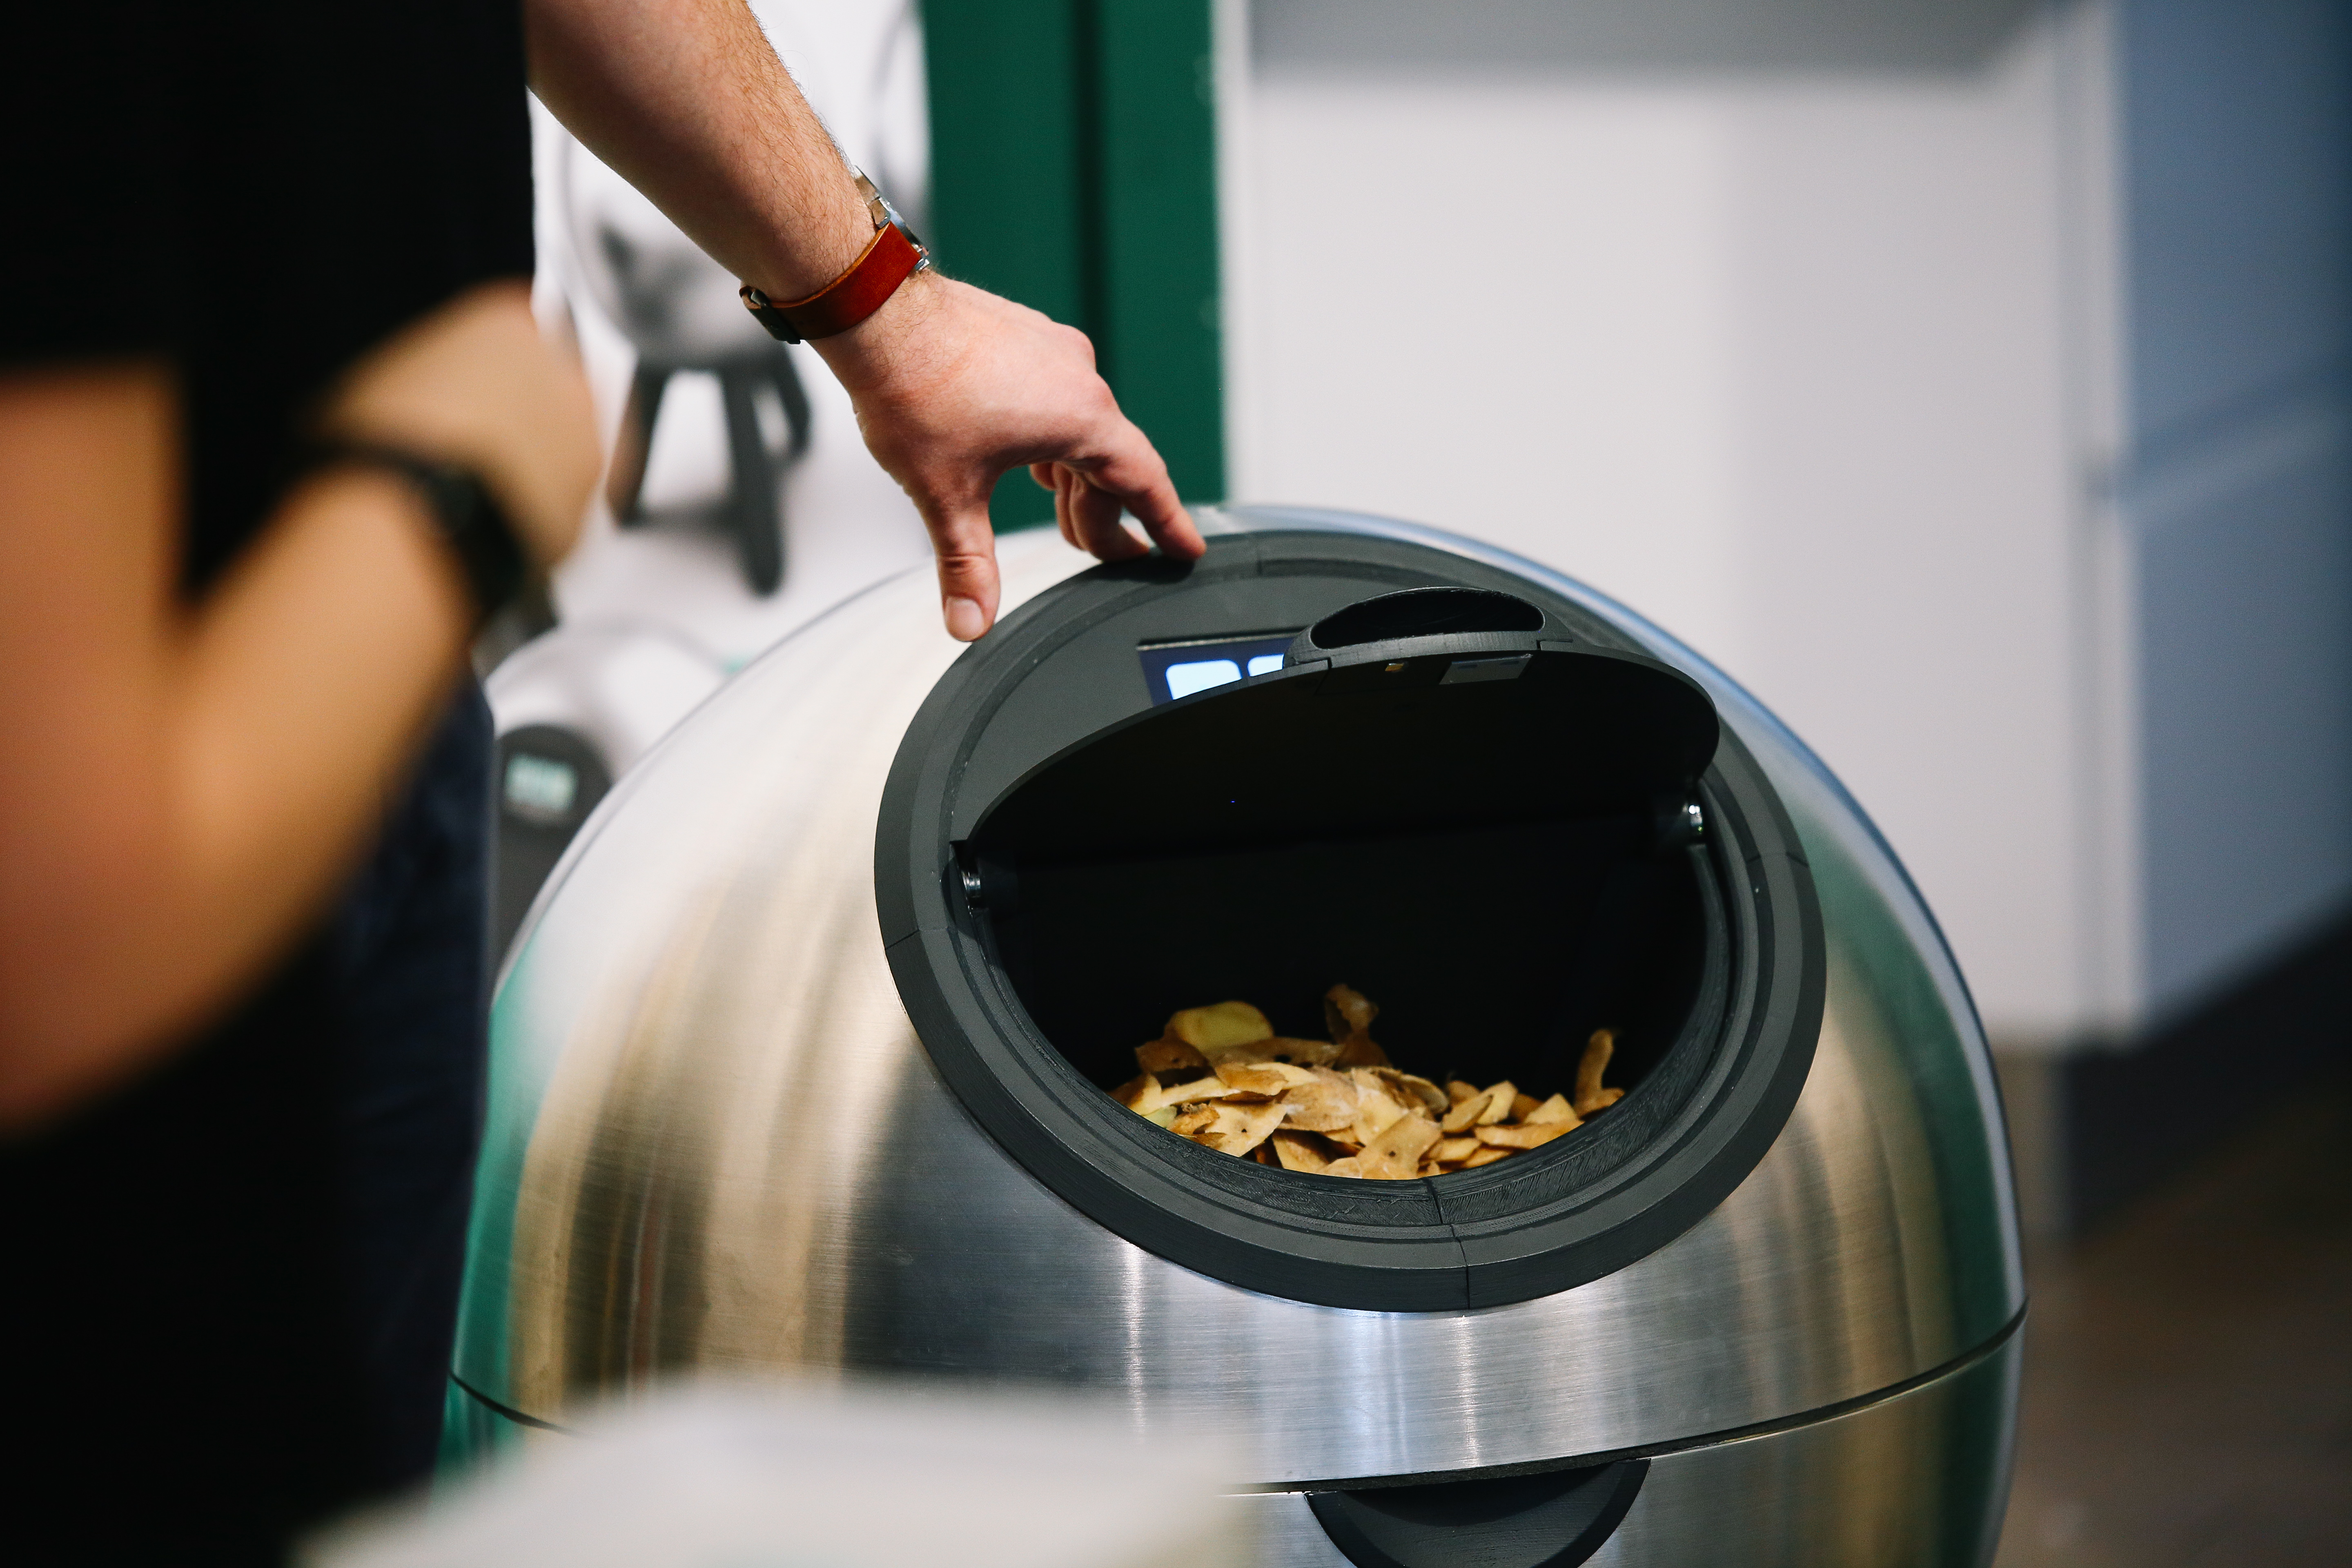 CompoBot Aiming to Revolutionize Office Biowaste Recycling